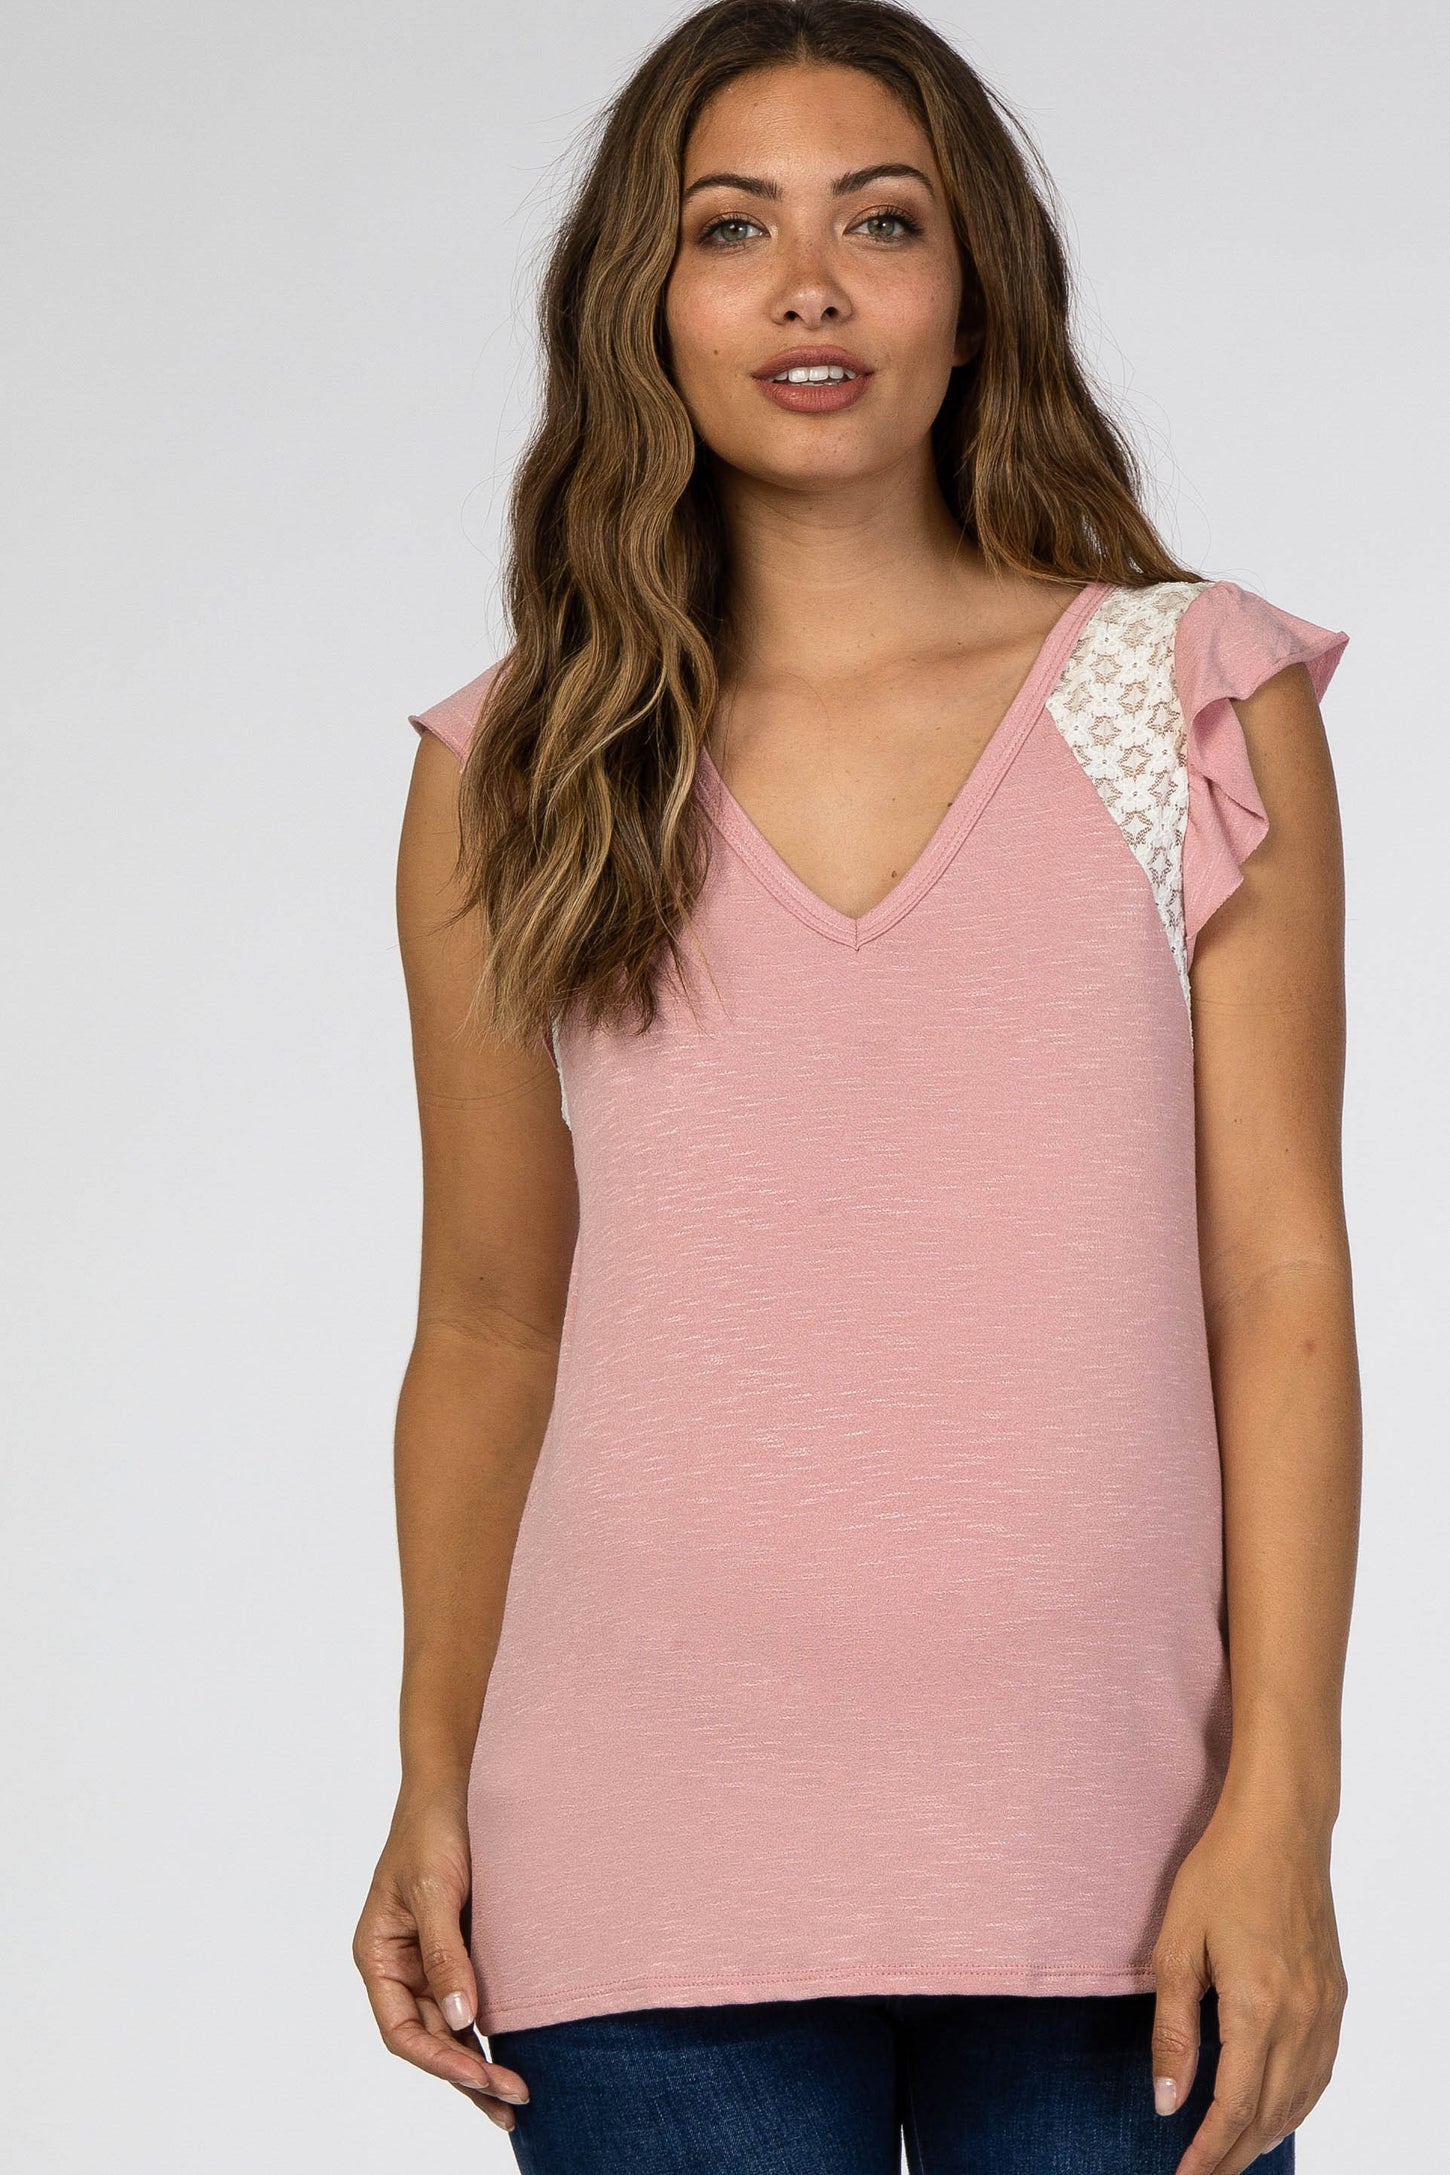 Pink Lace Inset Ruffle Accent Maternity Top